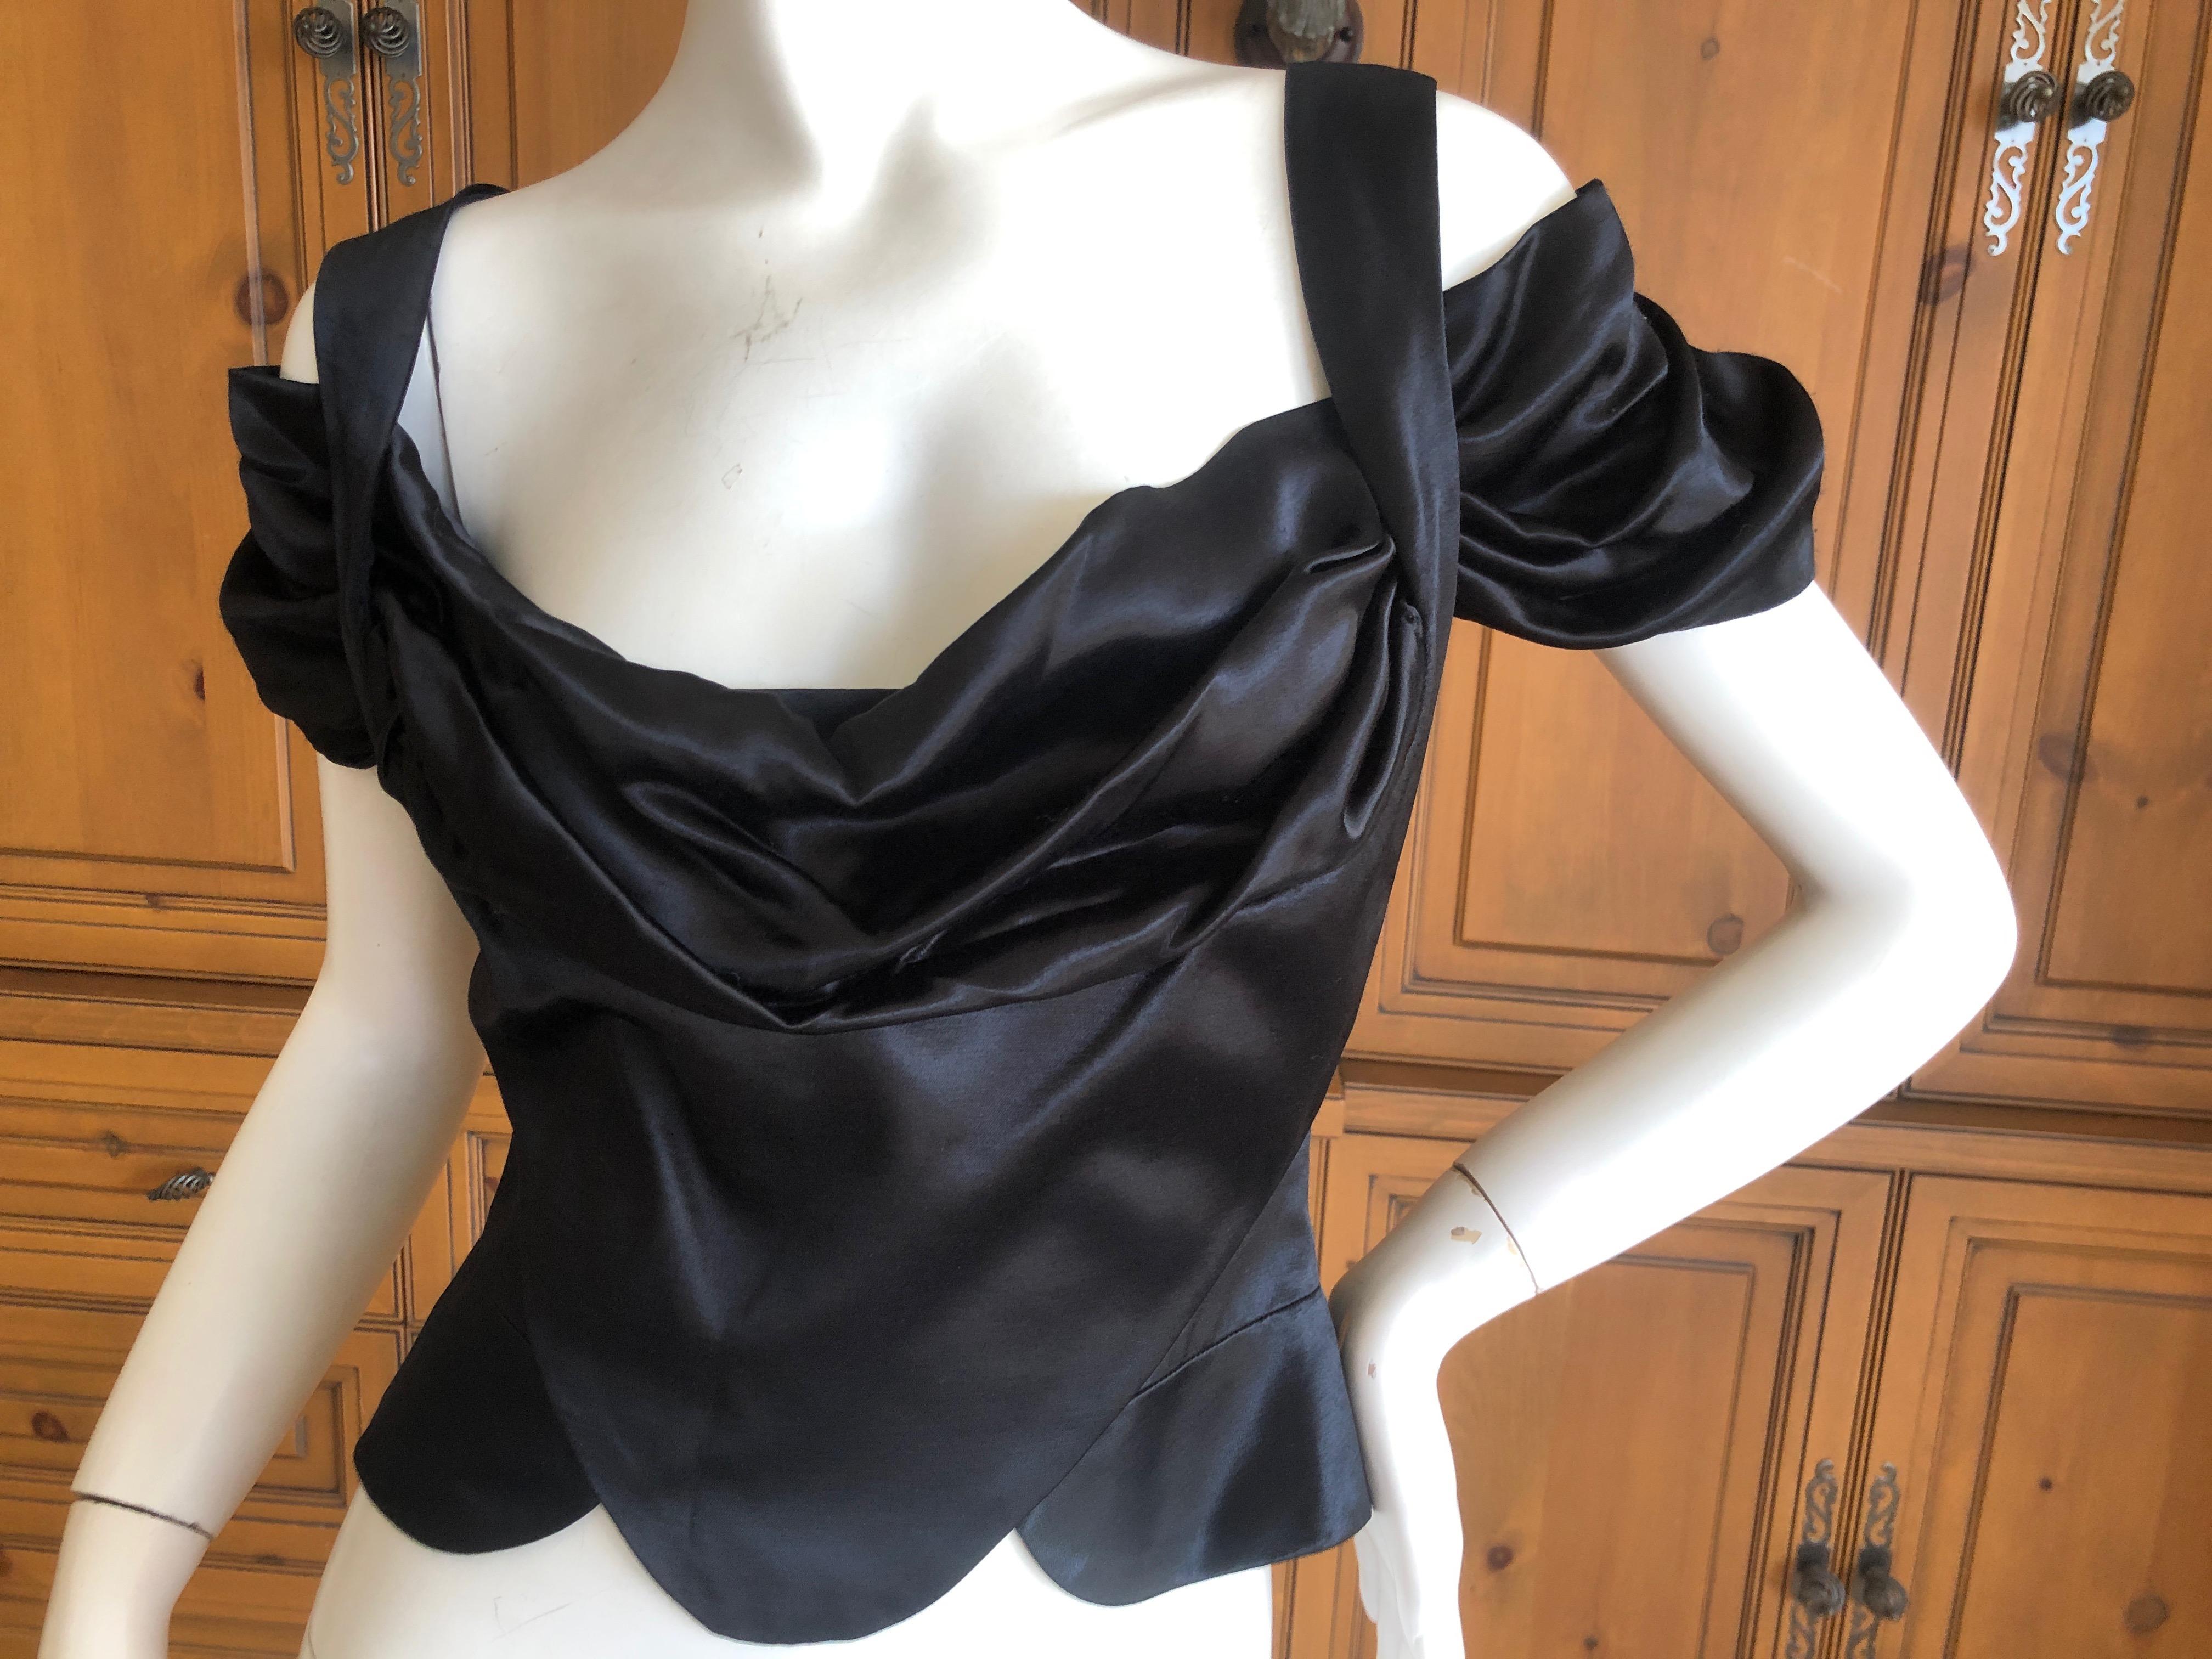 Vivienne Westwood Vintage Red Label Black Satin Drape Front Corset Top.
SO pretty
Size 42 UK
There is a lot of stretch in this fabric.
Bust 36